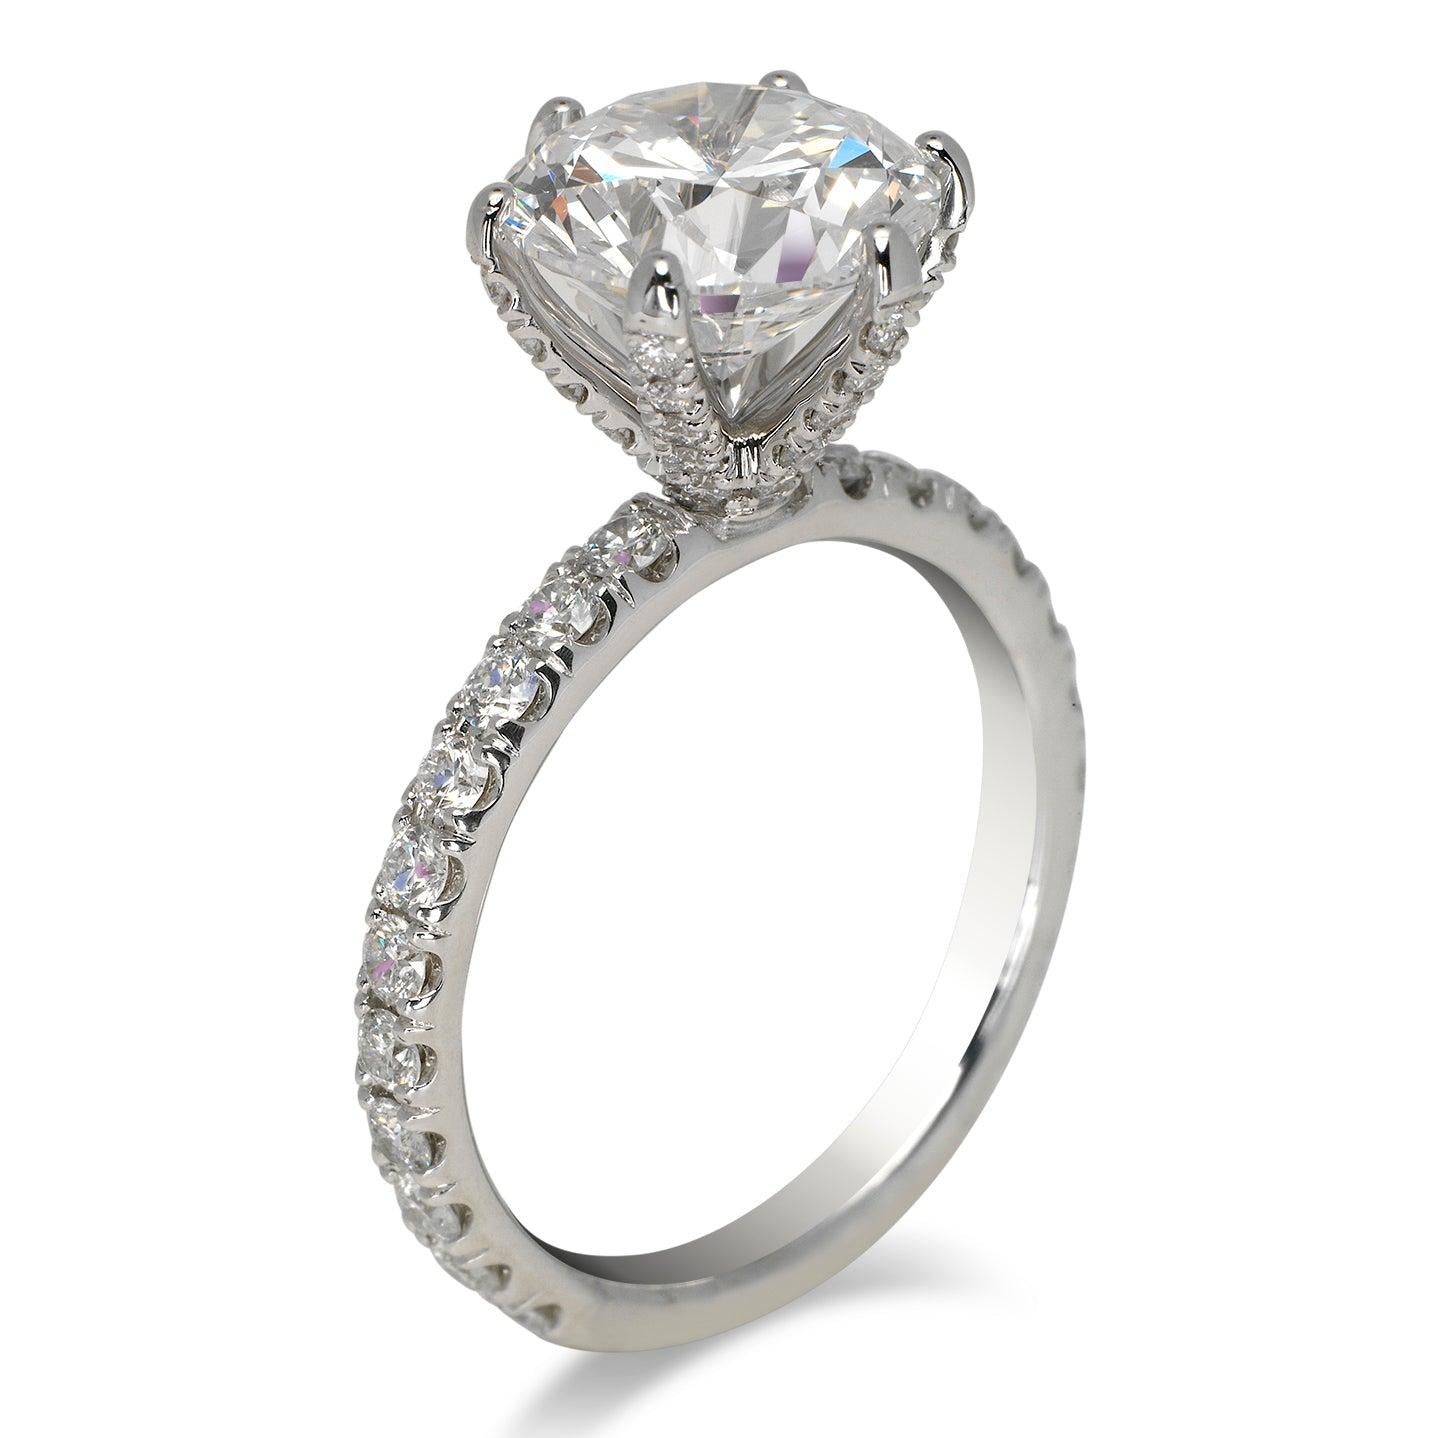 4 Carat Round Cut Diamond Engagement Ring GIA Certified D* VVS1 In New Condition For Sale In New York, NY